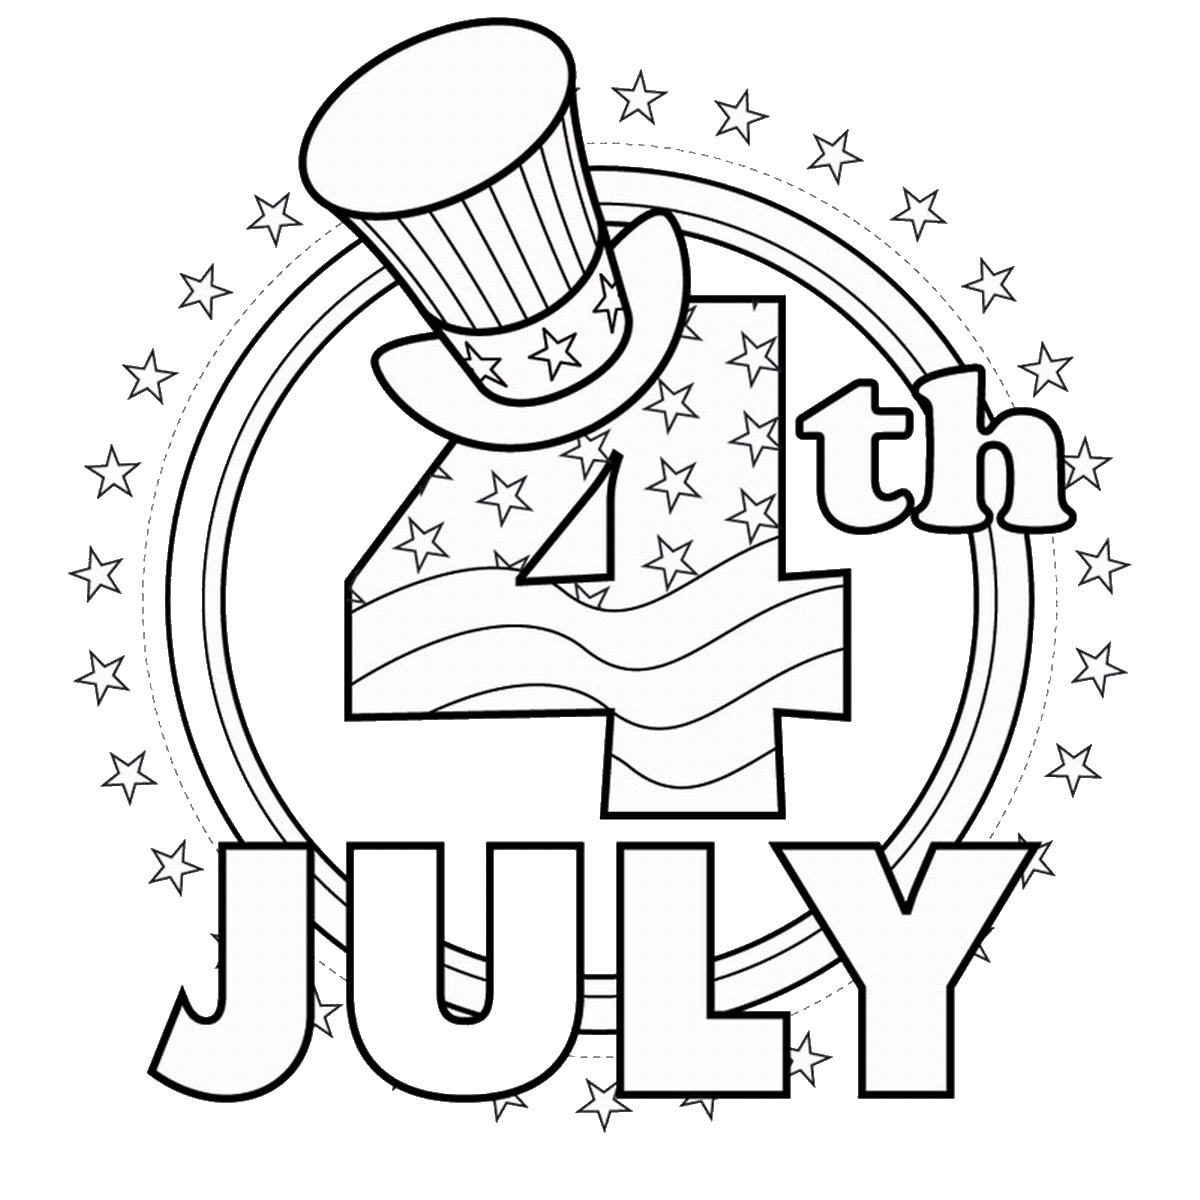 Fourth july clipart.